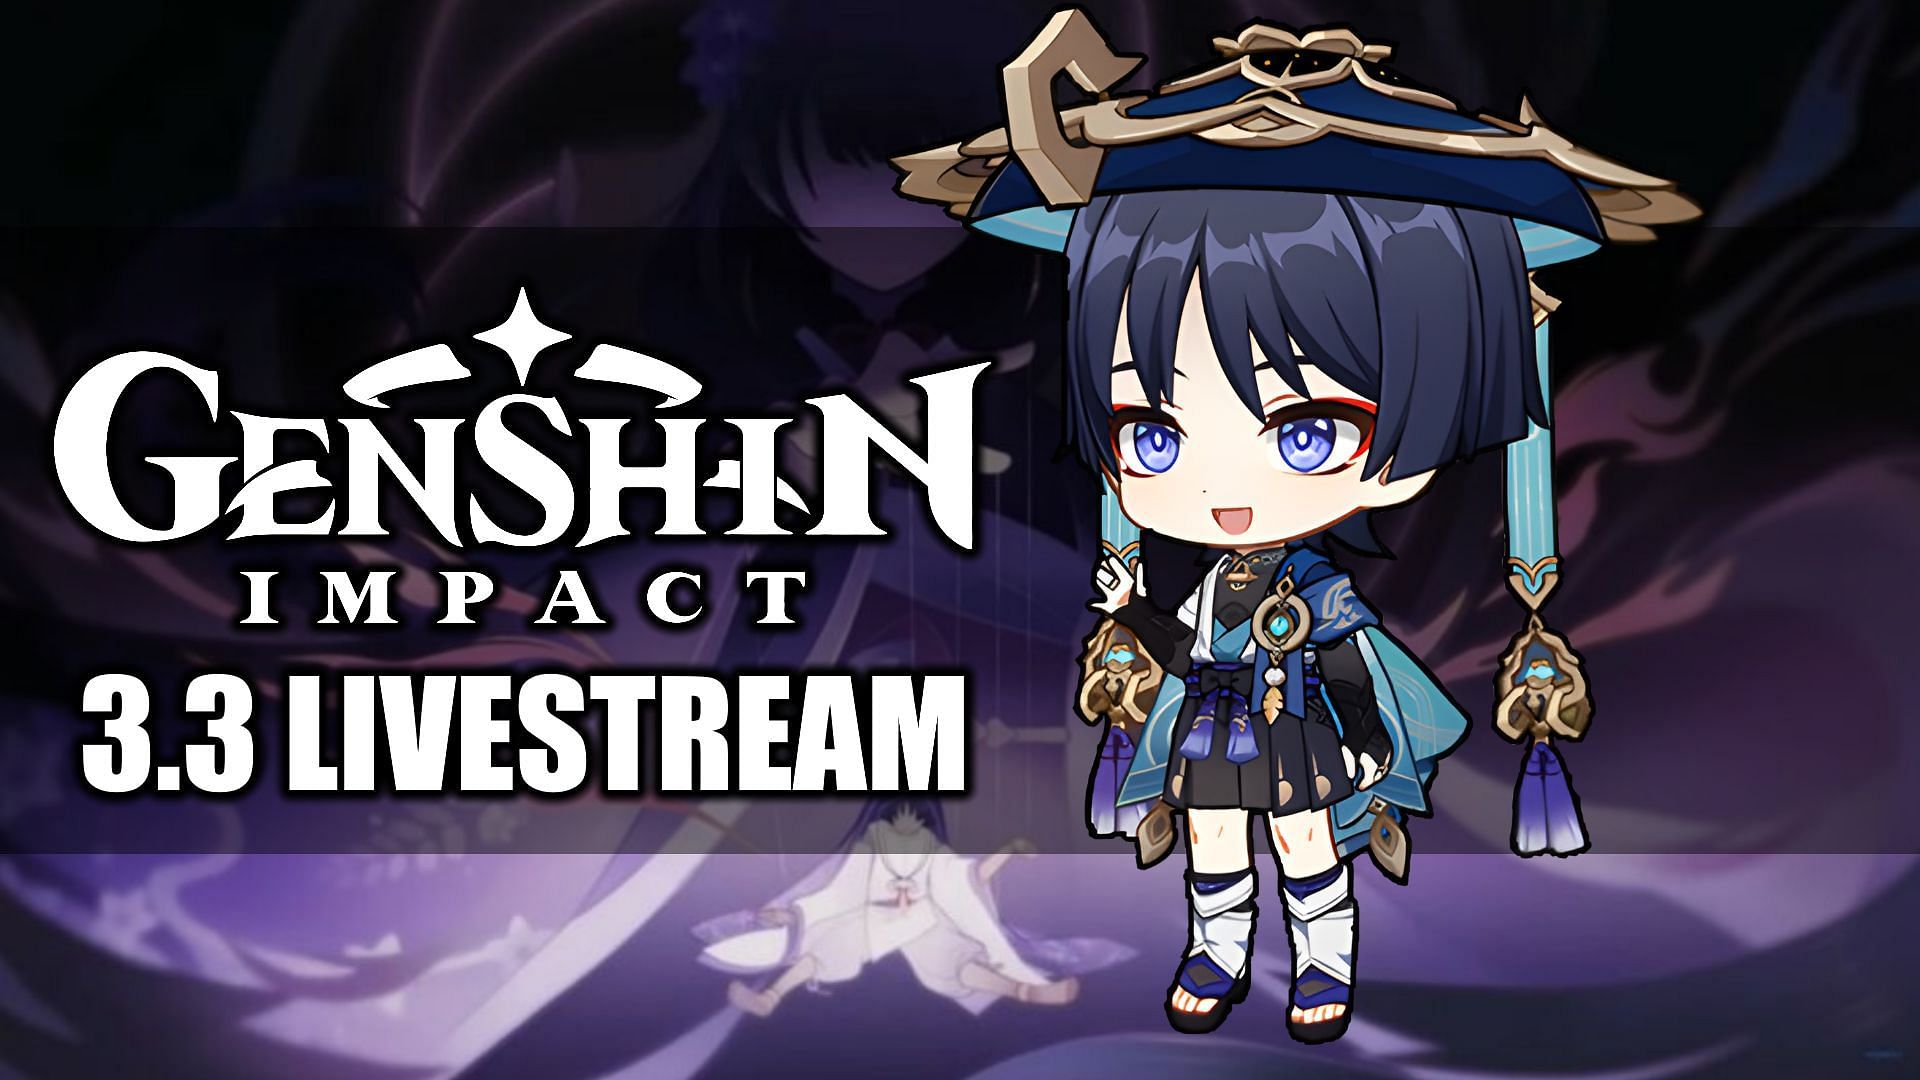 Genshin Impact 3.3 livestream: Date, link, and redeem code release time